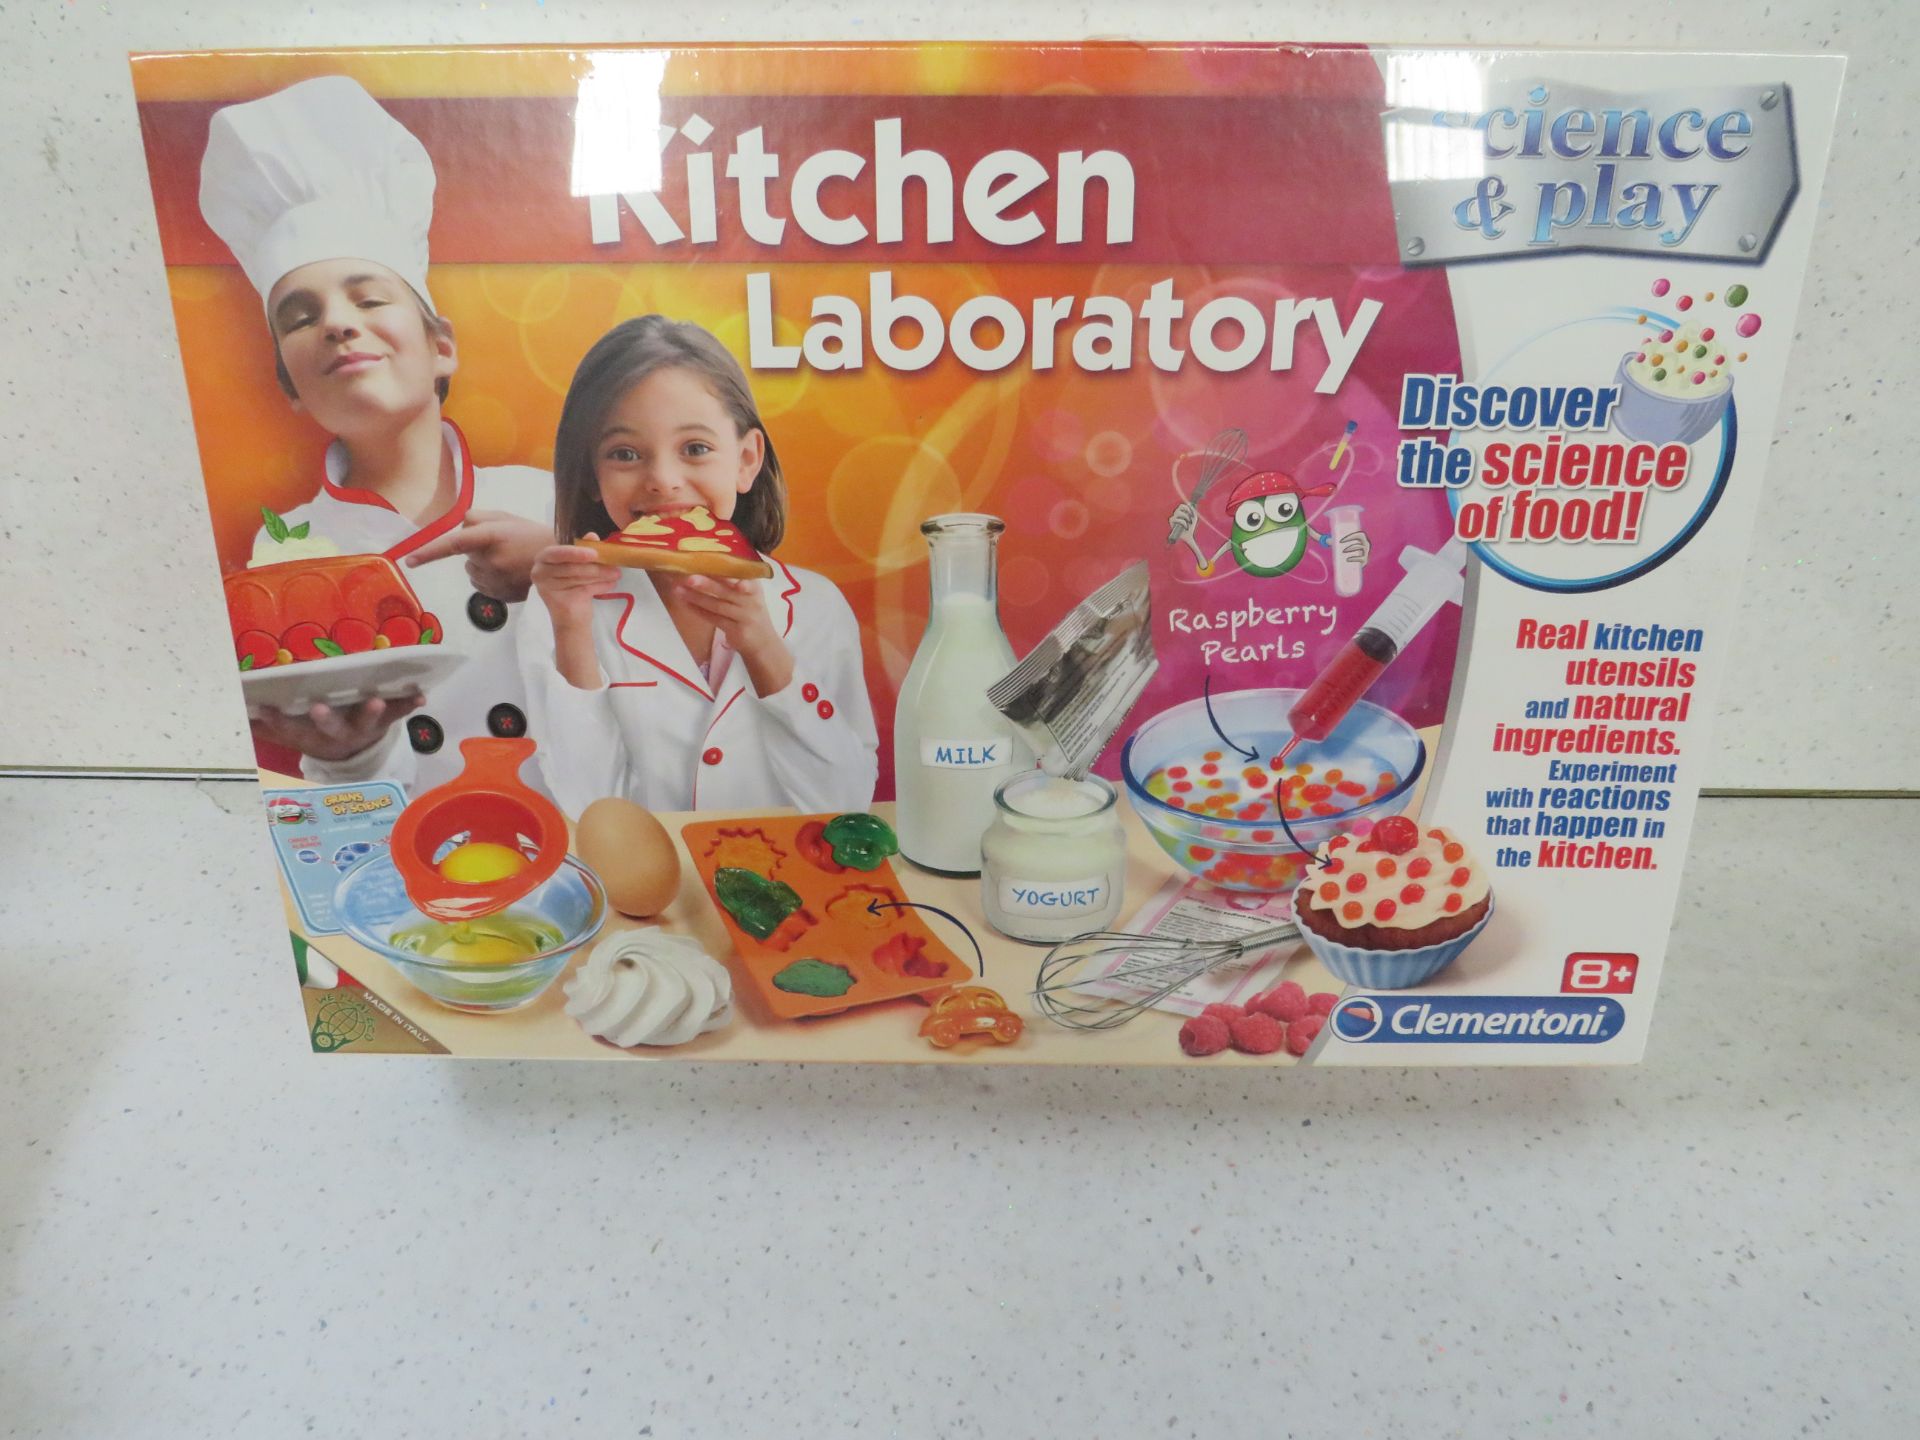 10x Clementoni - Kitchen Laboratory - Best Before 01/05/19 - All Unused & Packaged.